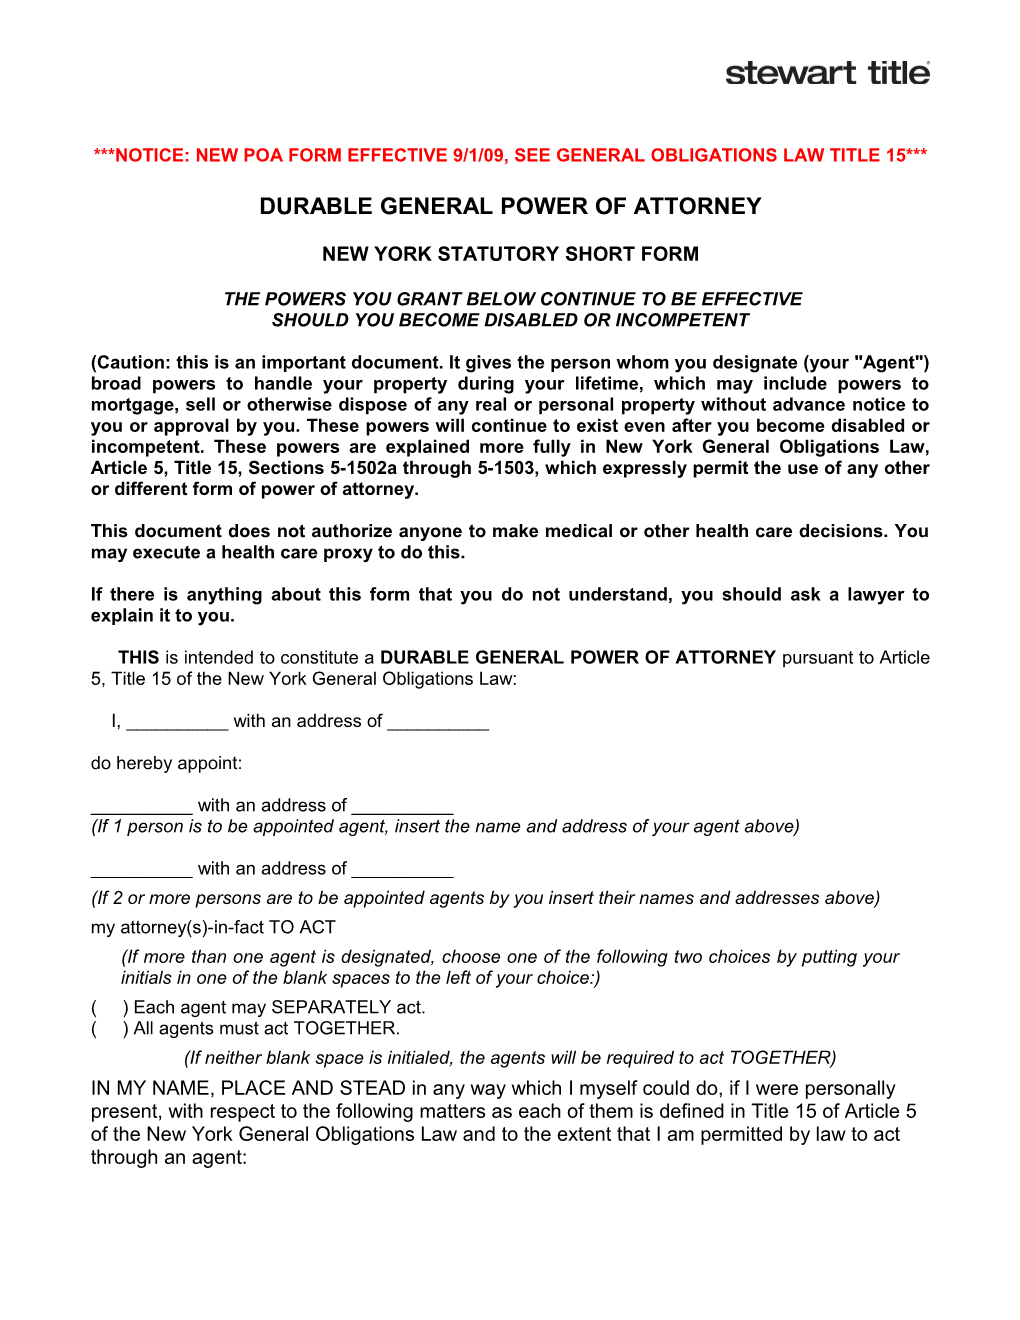 Notice: New Poa Form Effective 9/1/09, See General Obligations Law Title 15